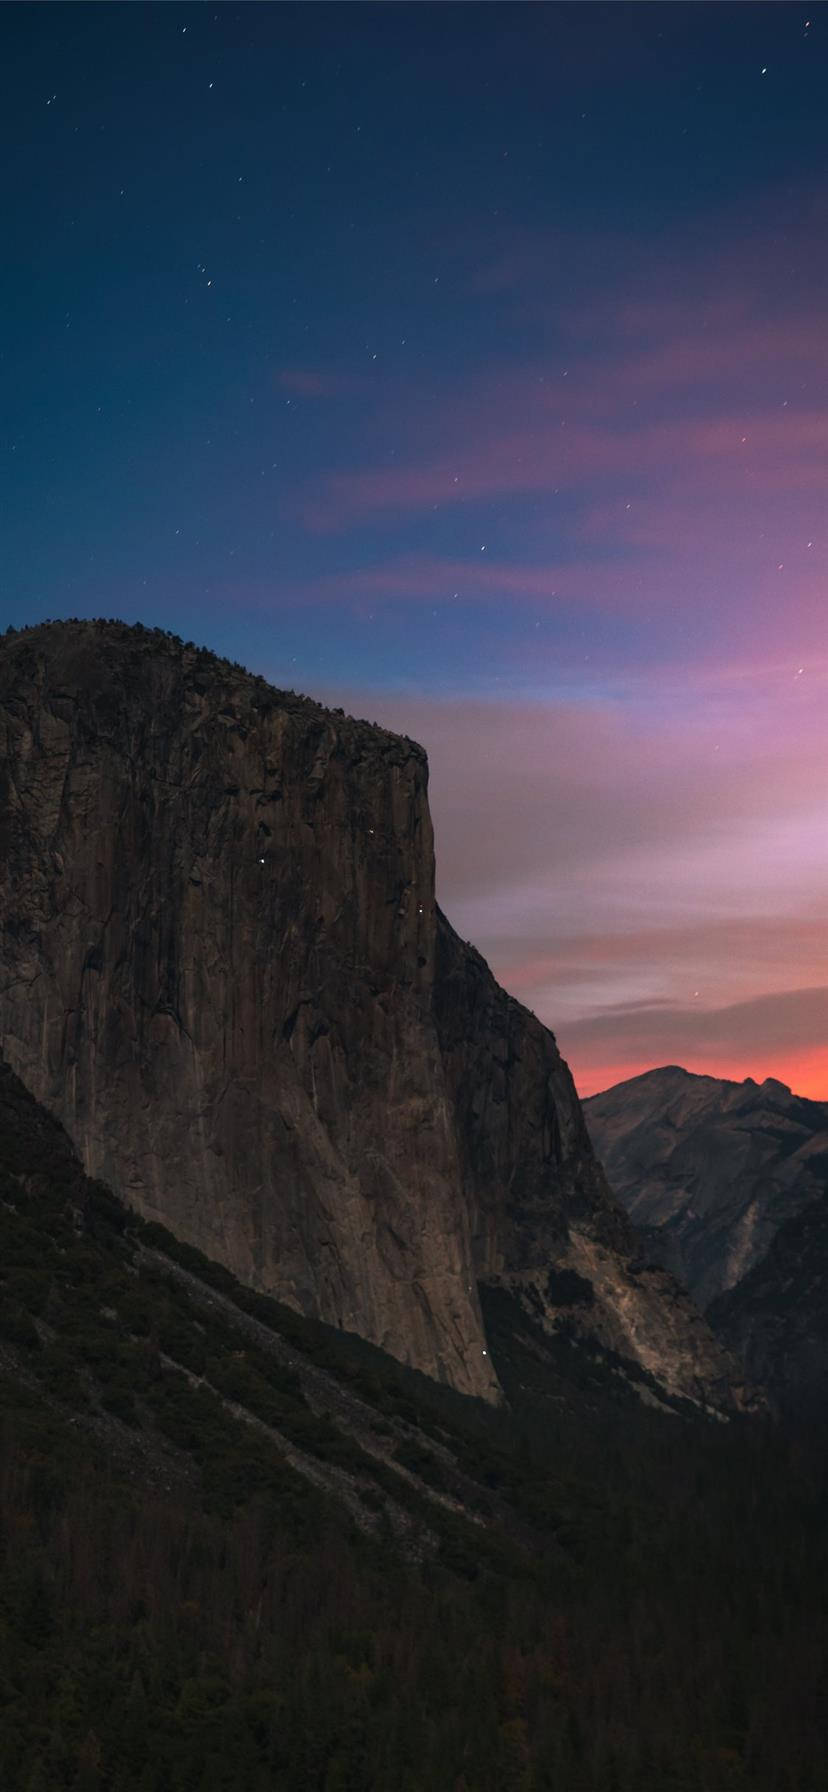 Download Enjoy the inspiring views of Yosemite National Park on your iPhone Wallpaper